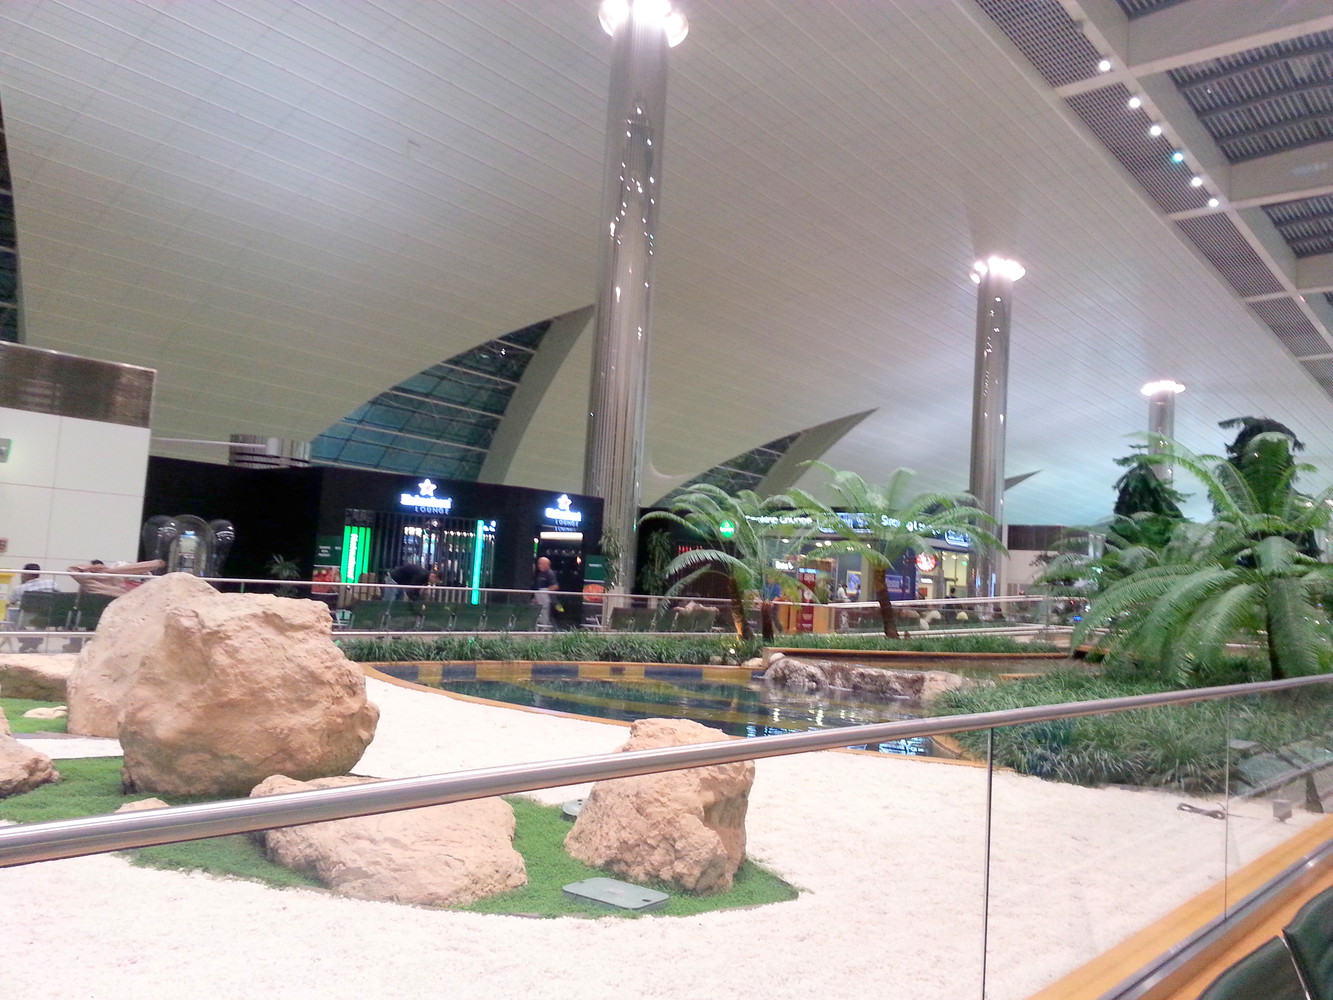 An indoor garden consisting of rocks, tiny pools, and palm trees at the terminal of an airport